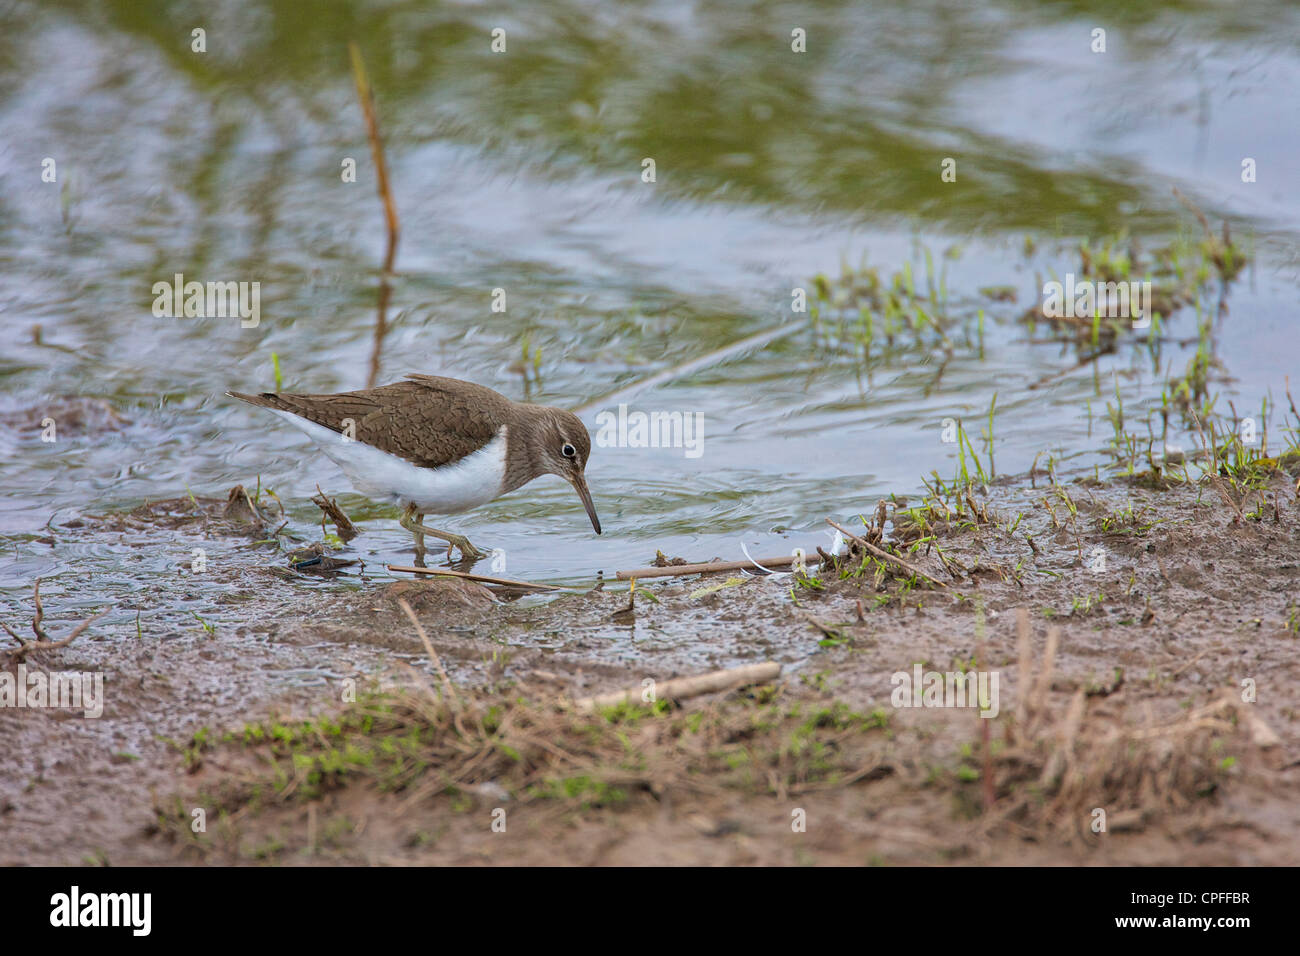 Common Sandpiper (Actitis hypoleucos) Foraging in the shallows along the edge of a body of water Stock Photo